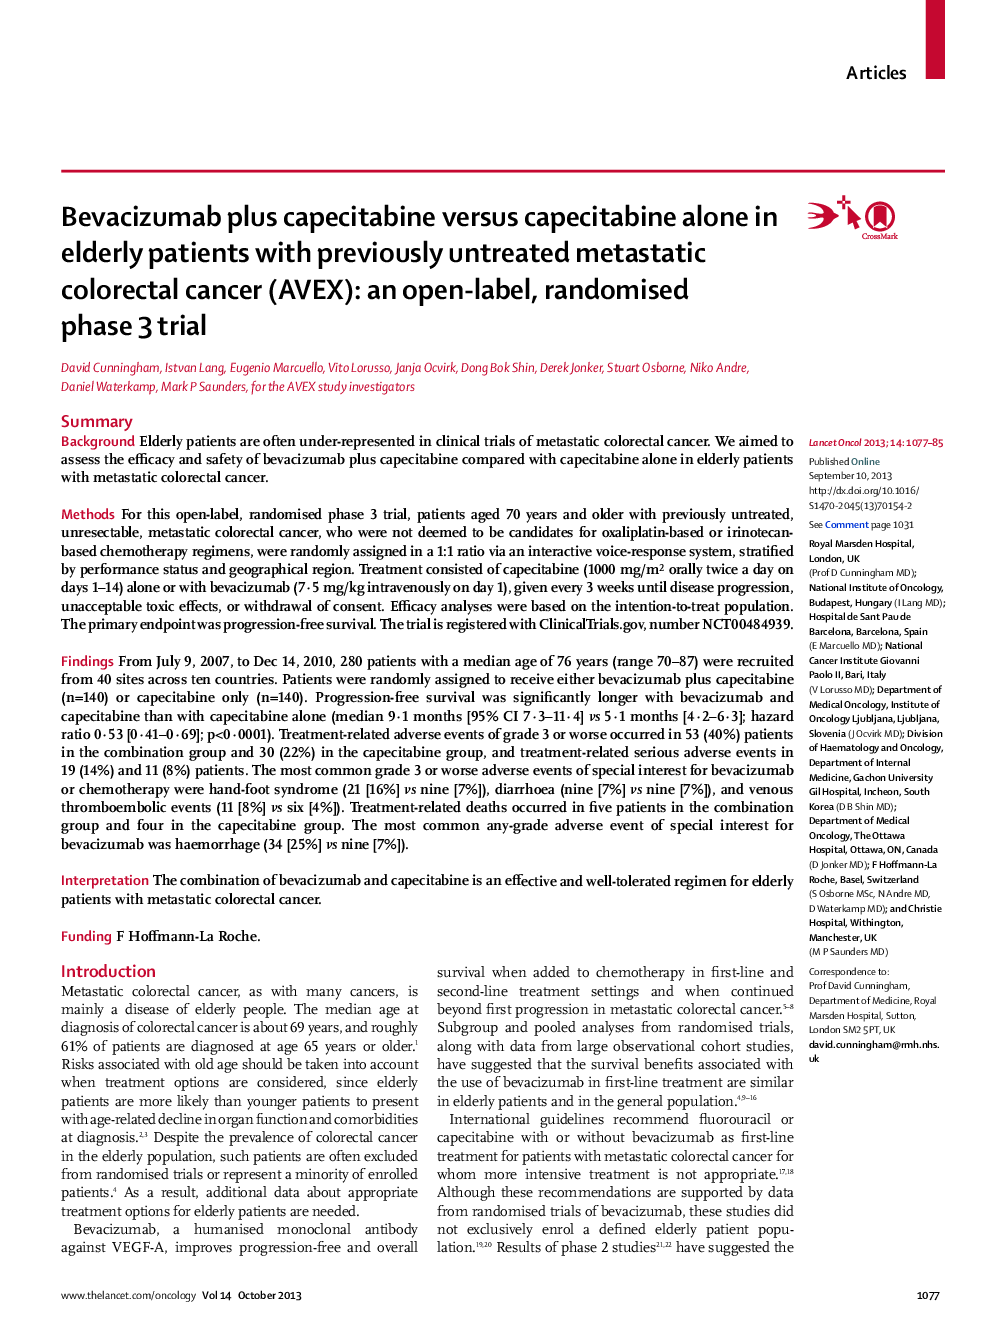 Bevacizumab plus capecitabine versus capecitabine alone in elderly patients with previously untreated metastatic colorectal cancer (AVEX): an open-label, randomised phase 3 trial